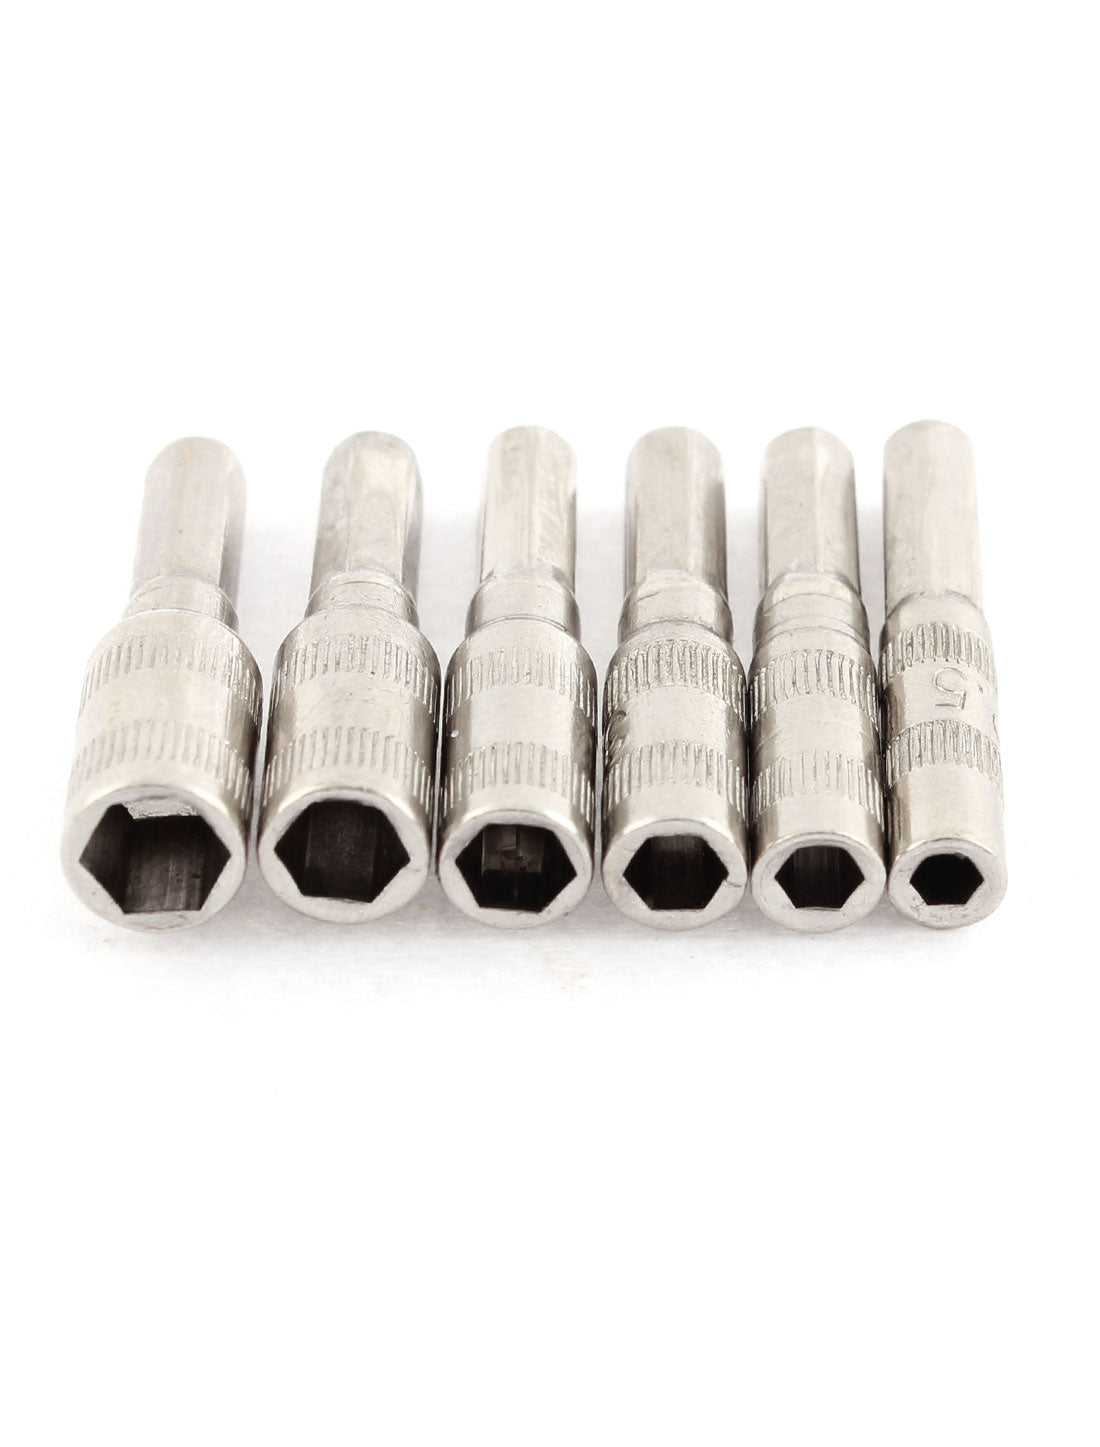 uxcell Uxcell H4 Hexagon Shank 2.5mm 3mm 3.5mm 4mm 4.5mm 5mm 6 Points Hex Socket 6 in 1